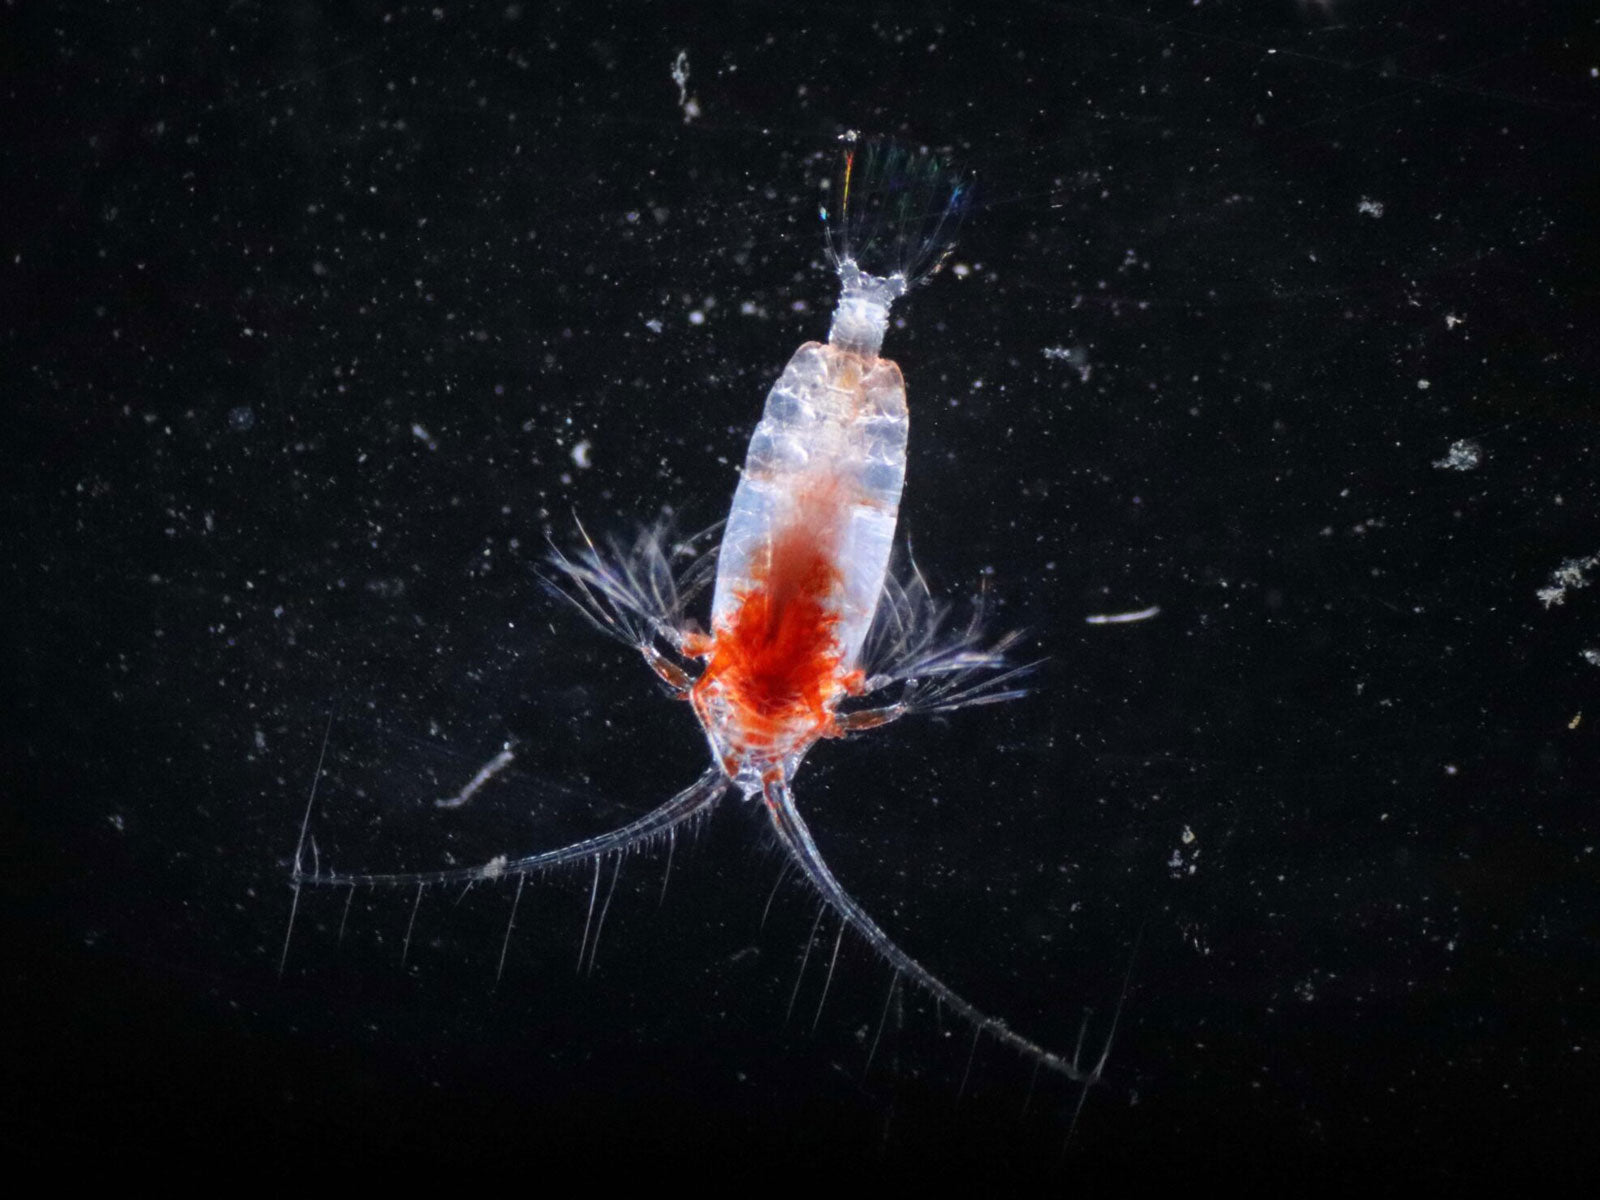 THE PLANKTON, AS IMPORTANT AS THE AIR WE BREATH